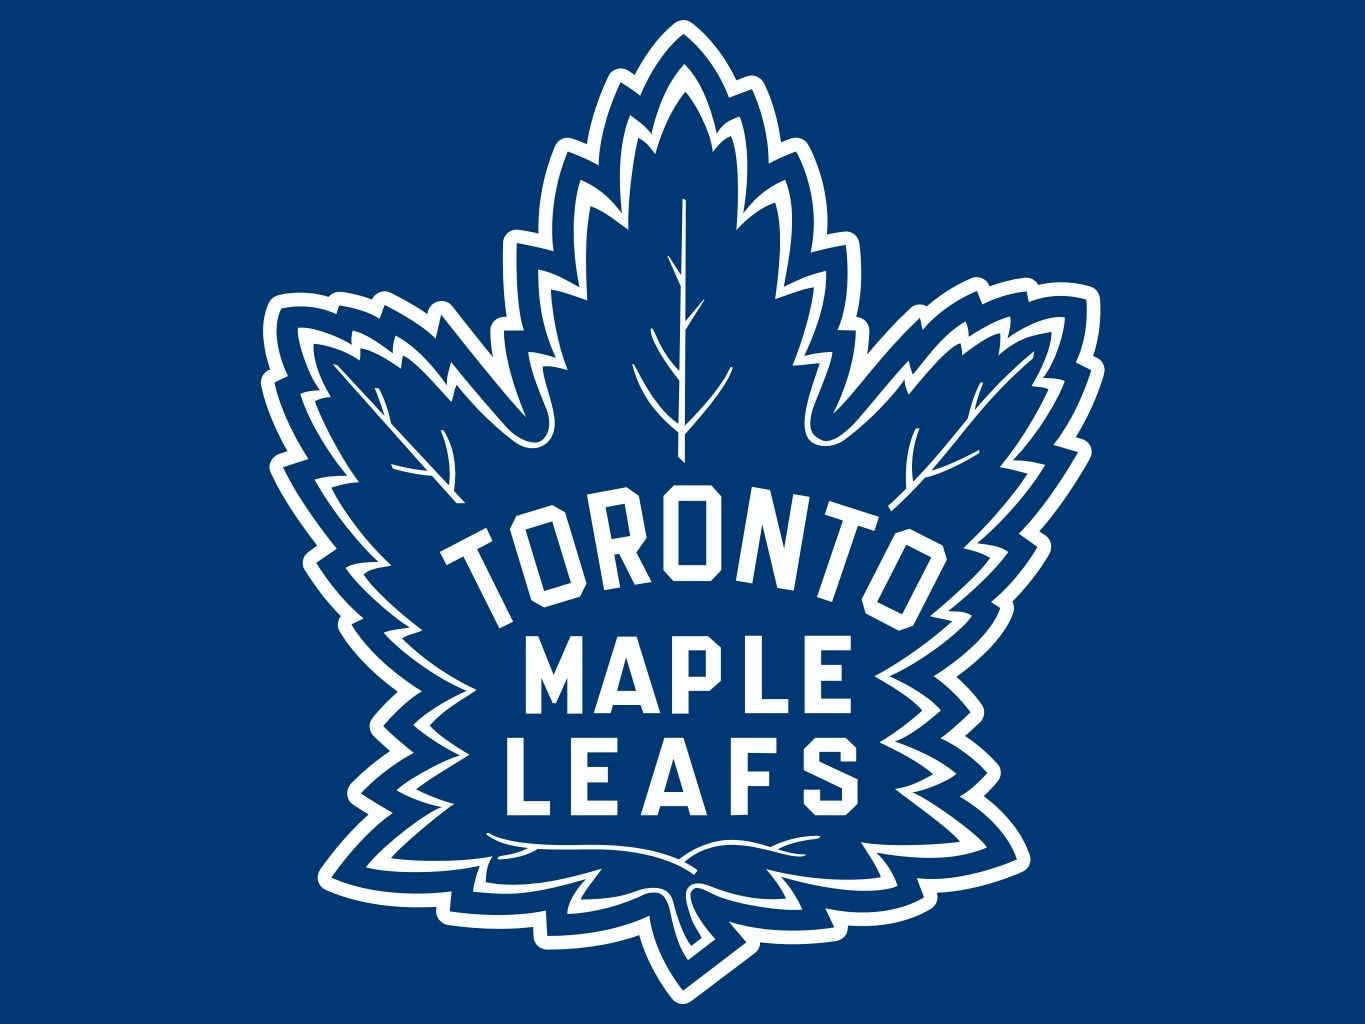 Toronto Maple Leafs 2015 Wallpapers - Wallpaper Cave